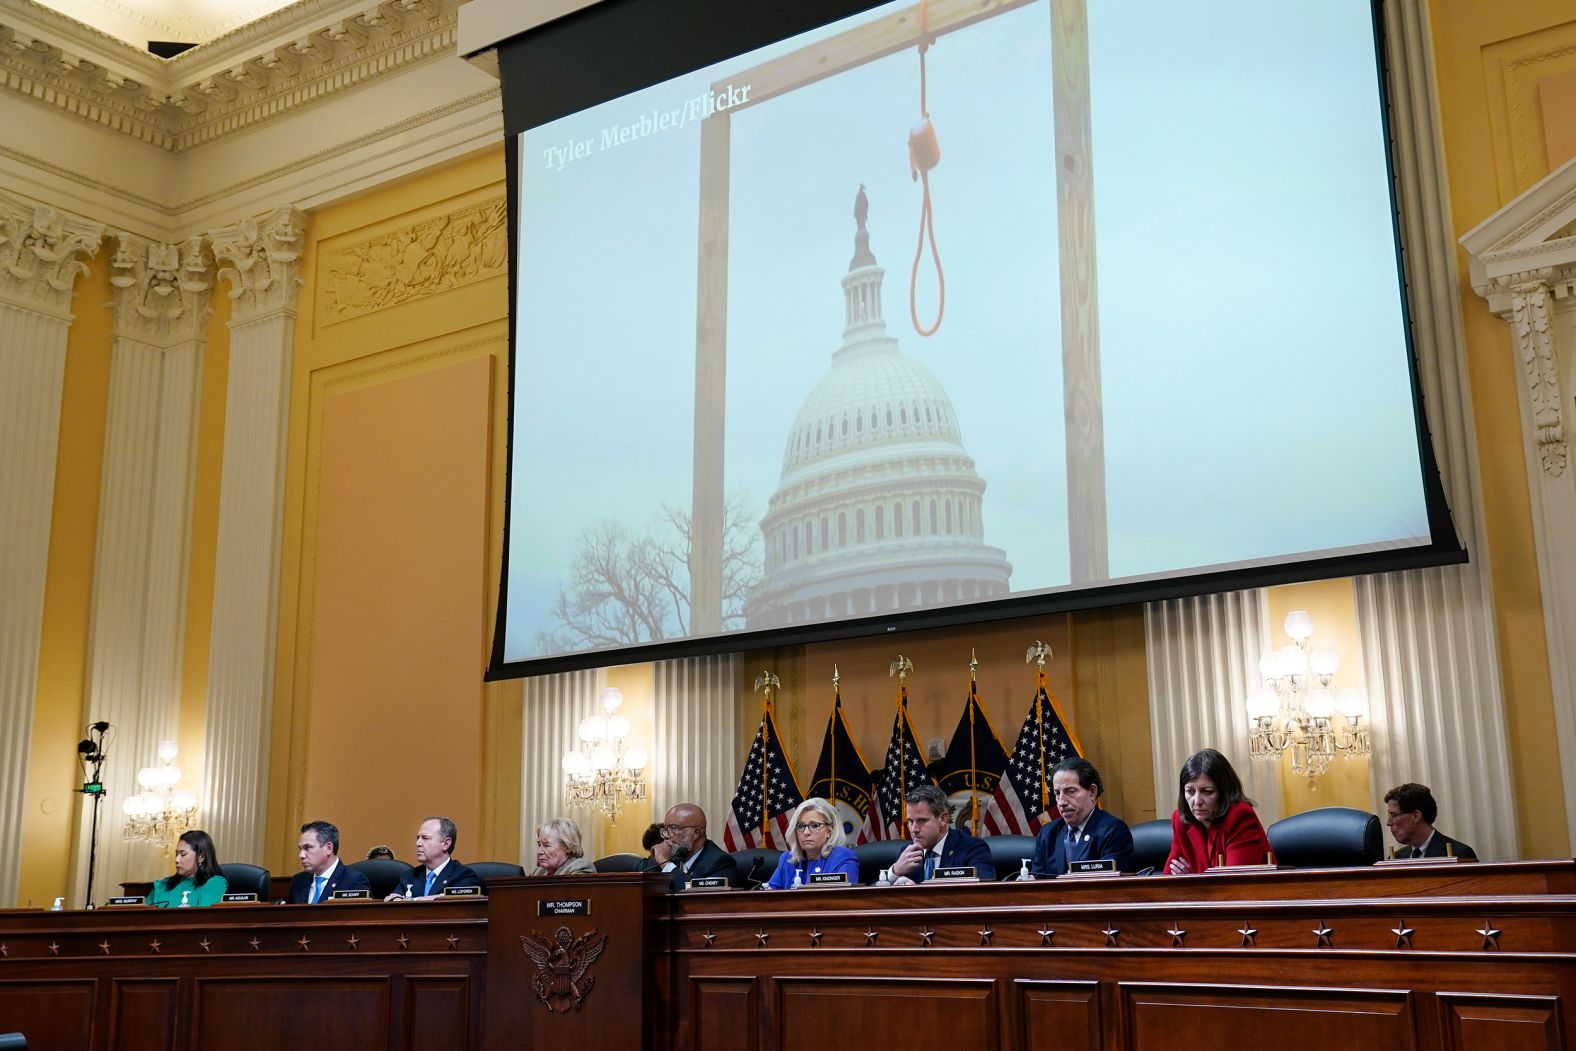 An image of a makeshift noose and gallows, seen on the Capitol grounds on January 6, is shown by the committee during <a href="index.php?page=&url=https%3A%2F%2Fwww.cnn.com%2F2022%2F06%2F09%2Fpolitics%2Fjan-6-hearing-takeaways-thursday%2Findex.html" target="_blank">its presentation on June 9.</a> The presentation showed a now-infamous clip of Trump supporters chanting, "Hang Mike Pence." Trump had criticized the vice president for announcing that he would not overturn the results of the 2020 election.